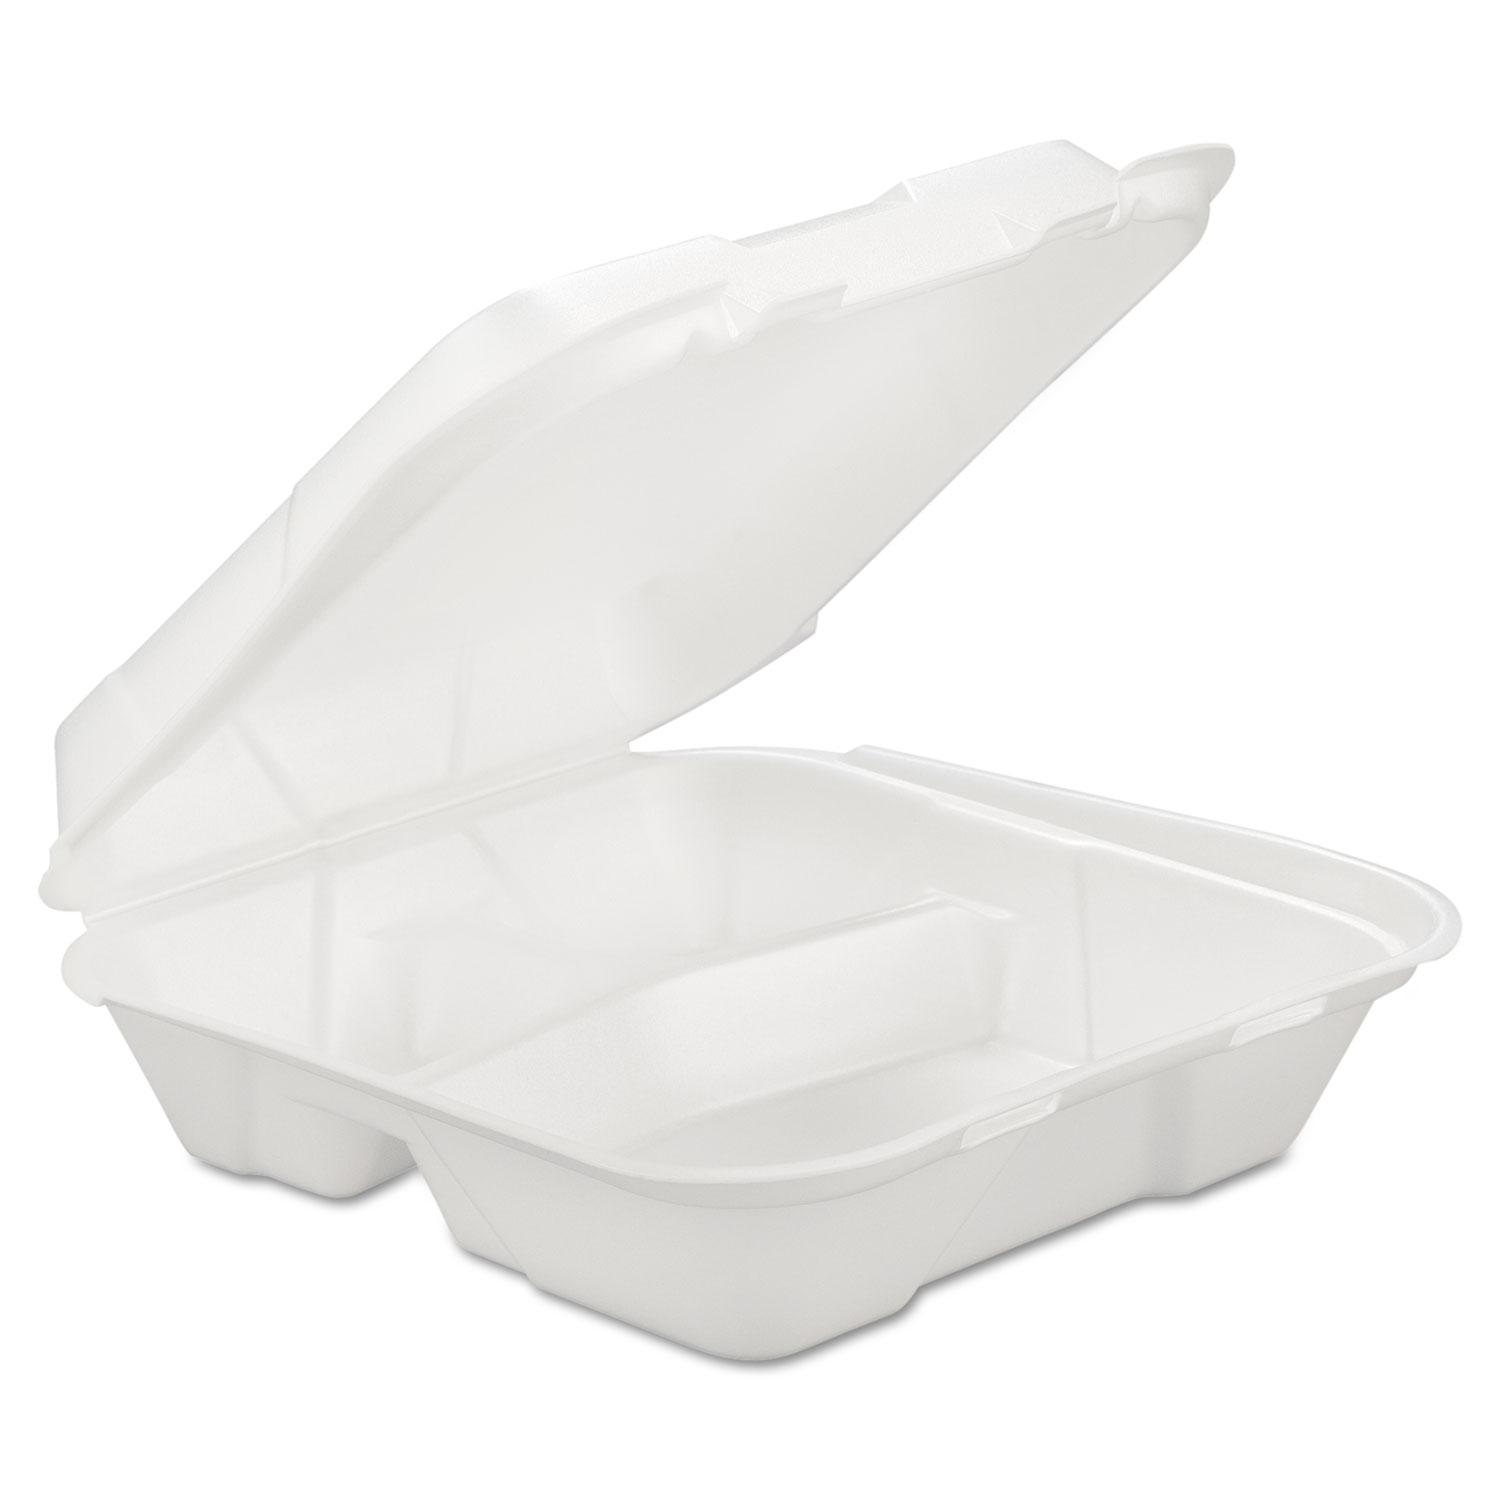  GEN SN203VW-H-0183400 Foam Hinged Carryout Container, 3-Comp, White, 9 1/4 X 9 1/4 X 3, 200/Carton (GENHINGEDL3) 